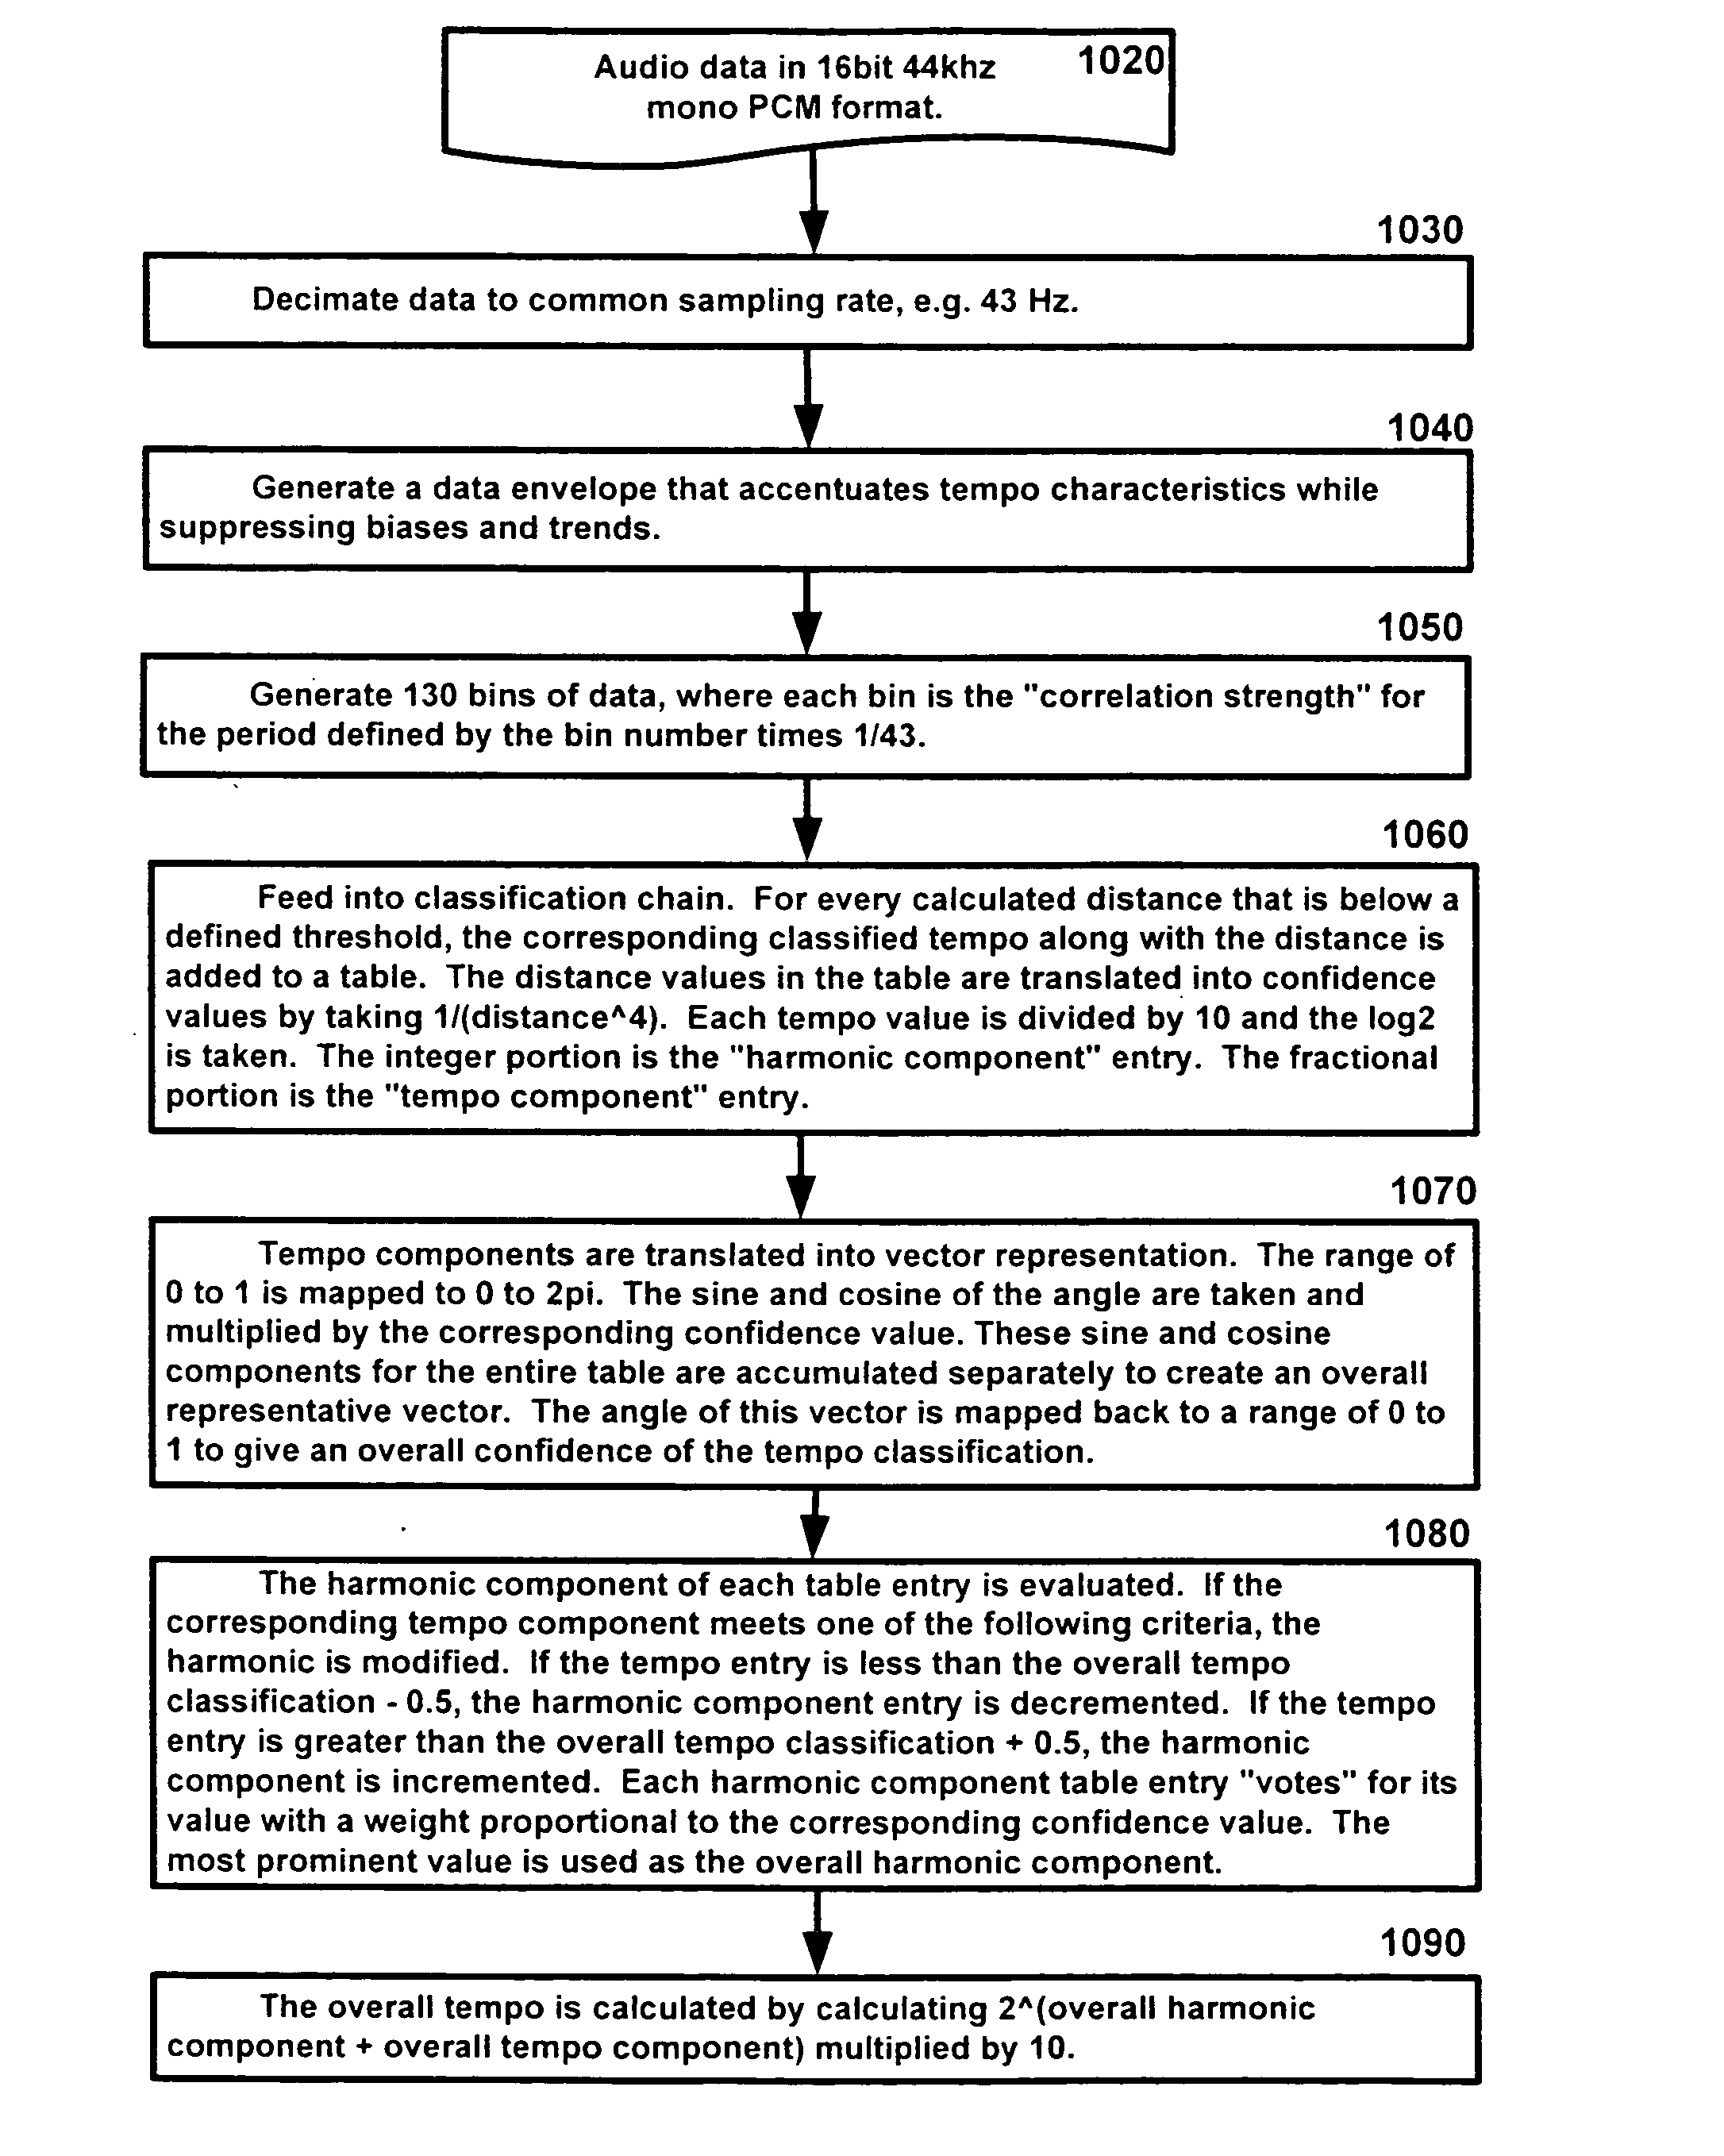 System and methods for providing automatic classification of media entities according to tempo